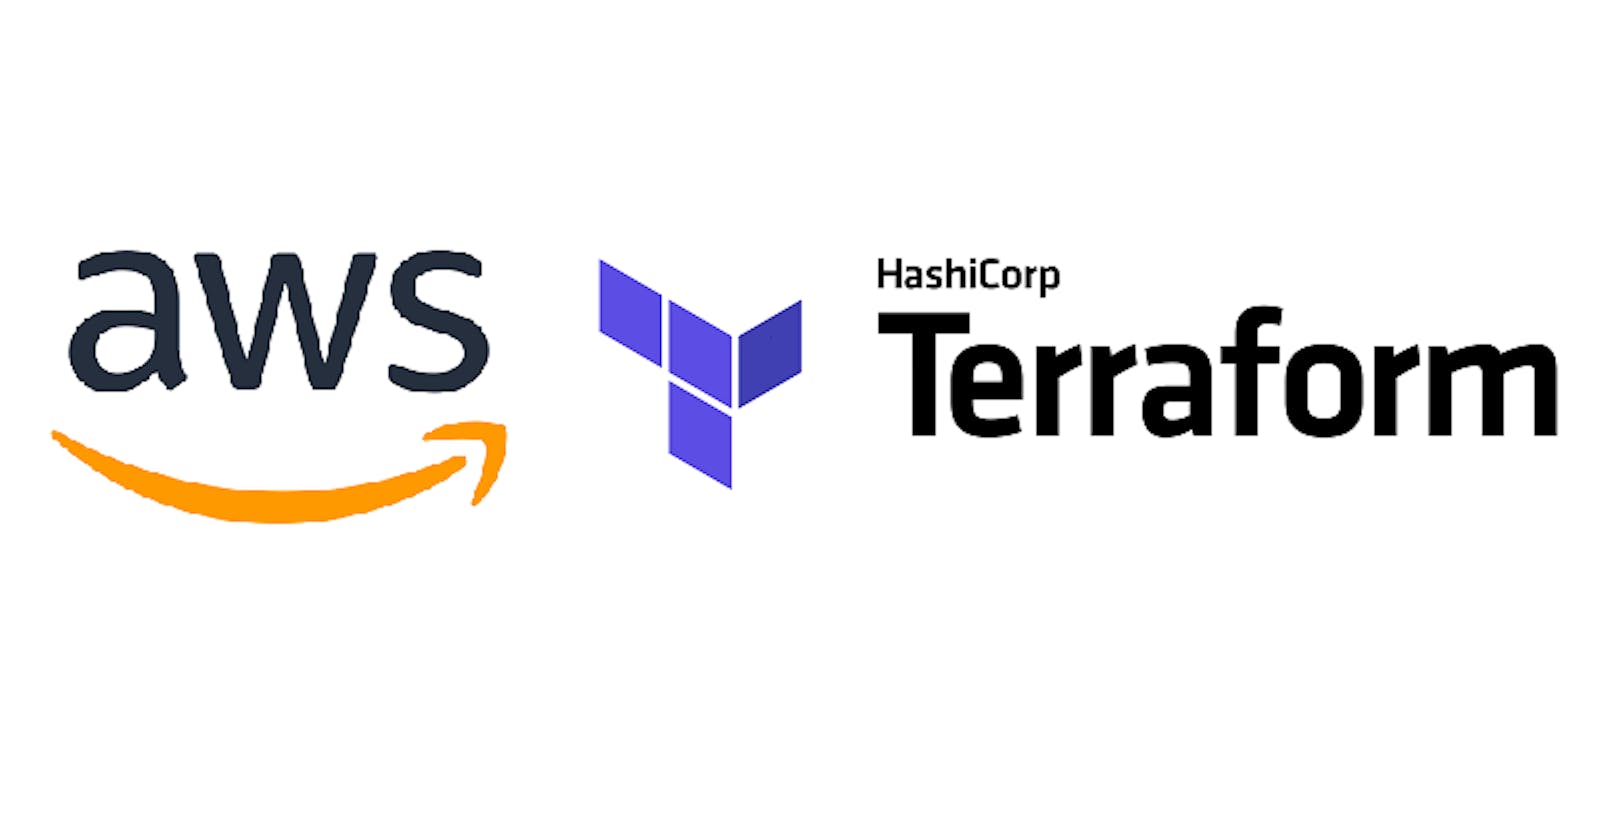 Introduction to Amazon Web Services and Terraform